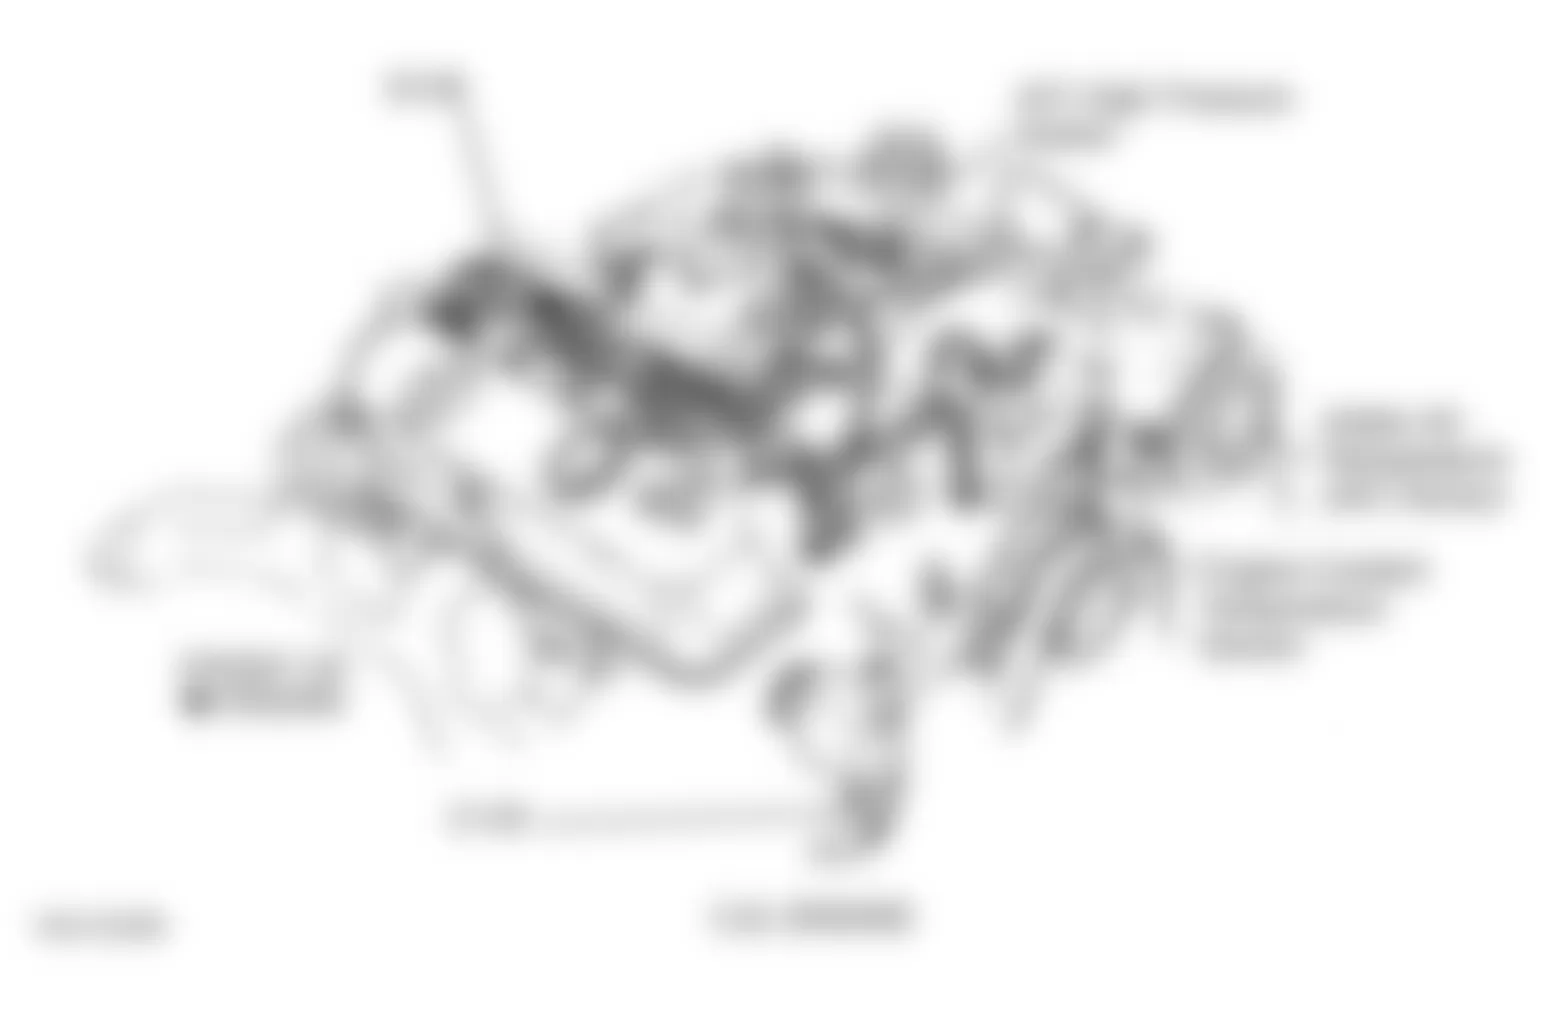 Jeep Grand Cherokee Laredo 1997 - Component Locations -  Top Of Engine (5.2L)